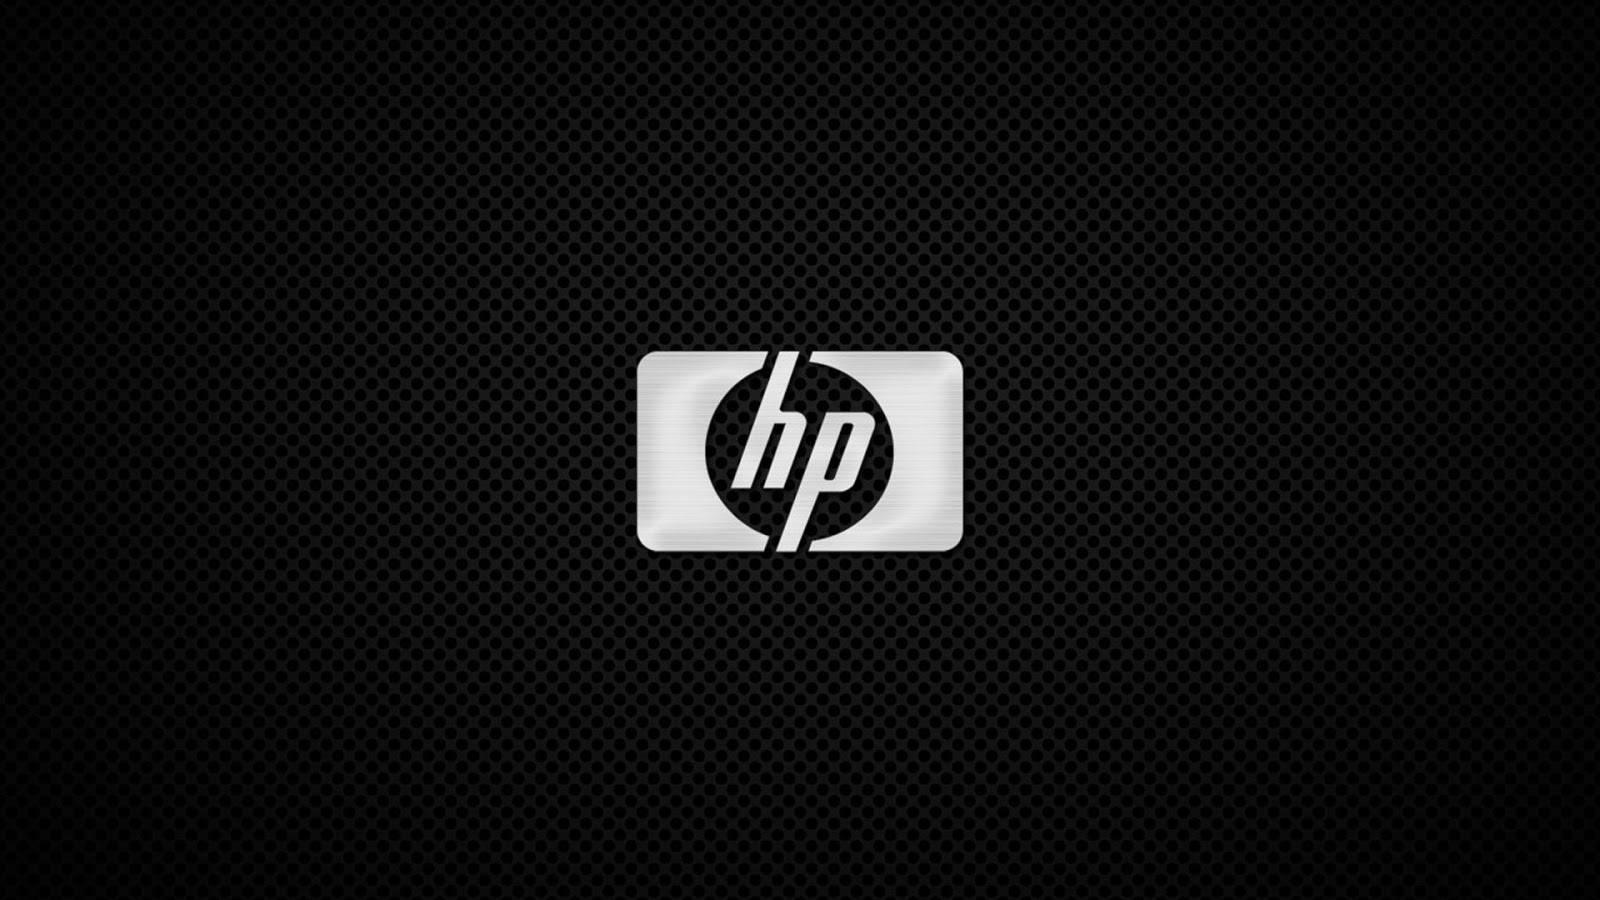 HP HD Wallpapers Latest HD Wallpapers